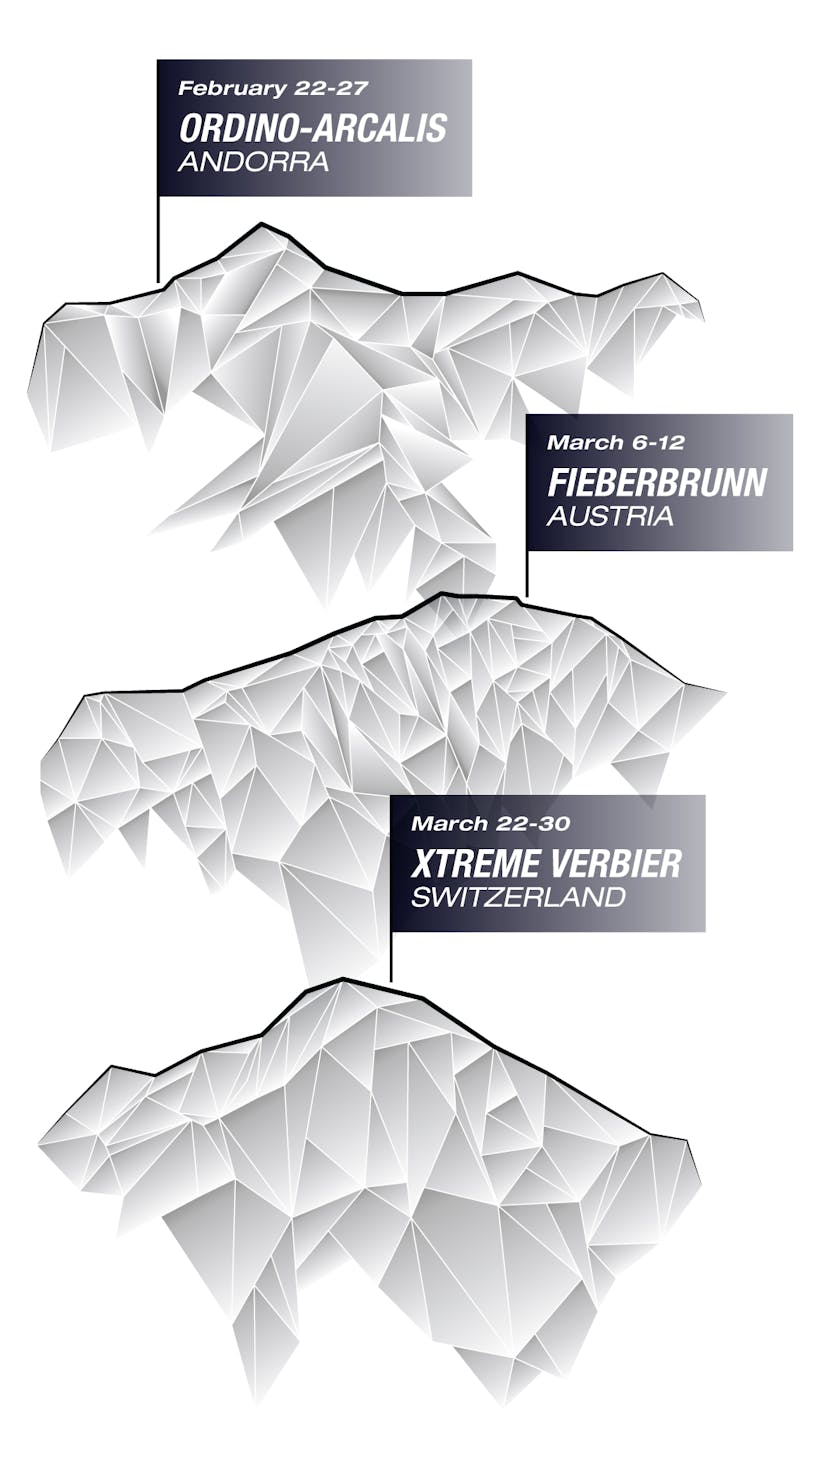 The 2021 Freeride World Tour Schedule